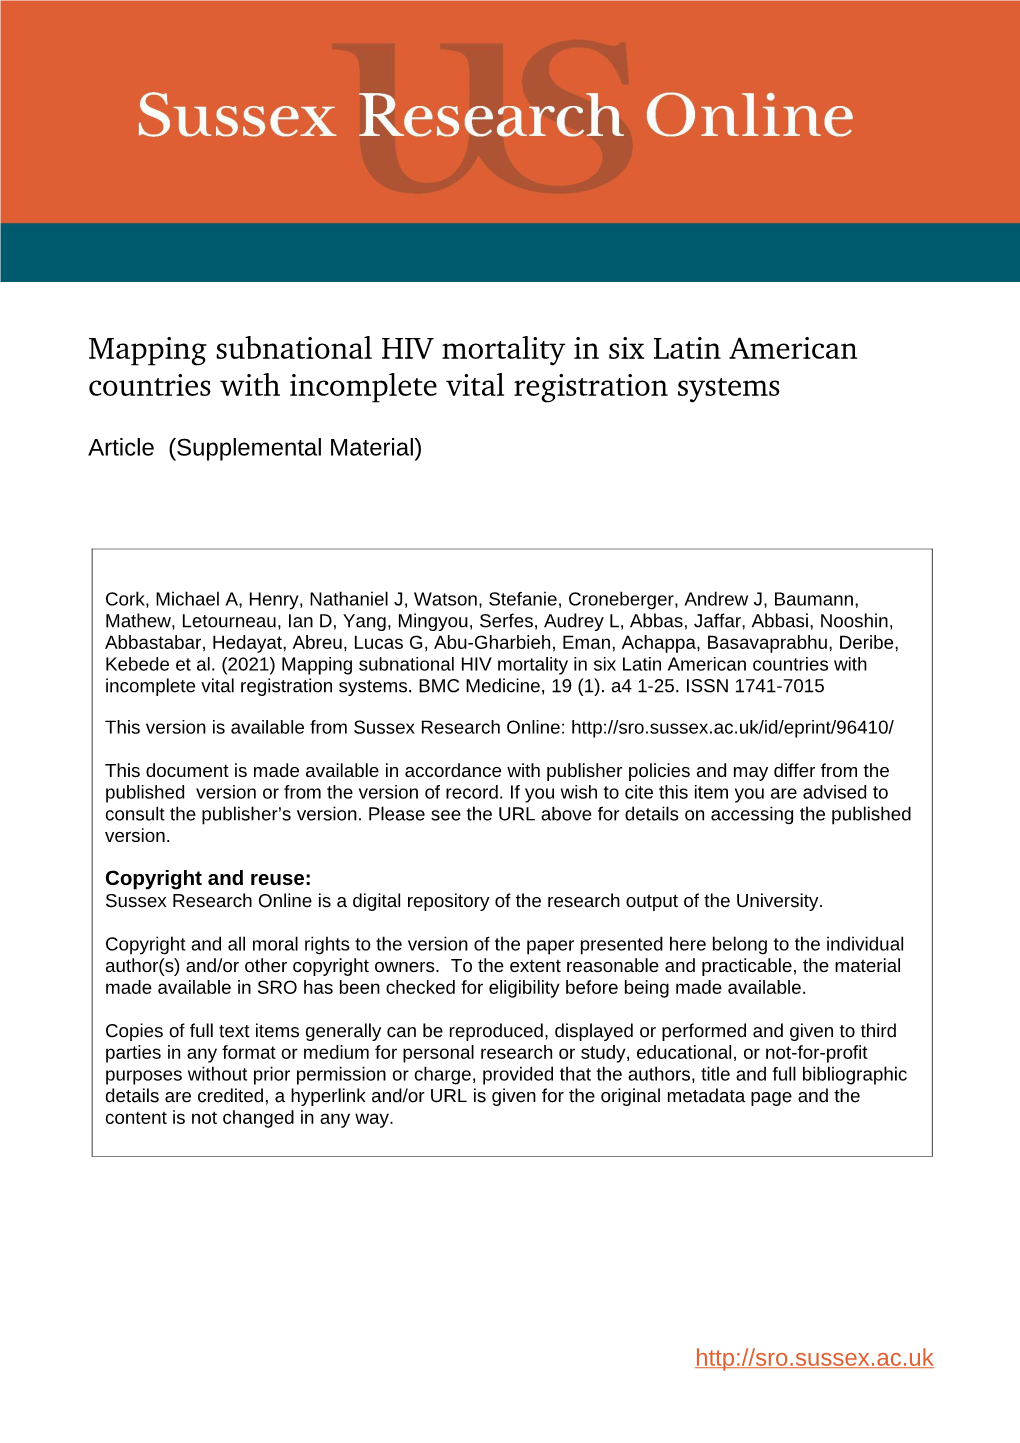 Mapping Subnational HIV Mortality in Six Latin American Countries with Incomplete Vital Registration Systems